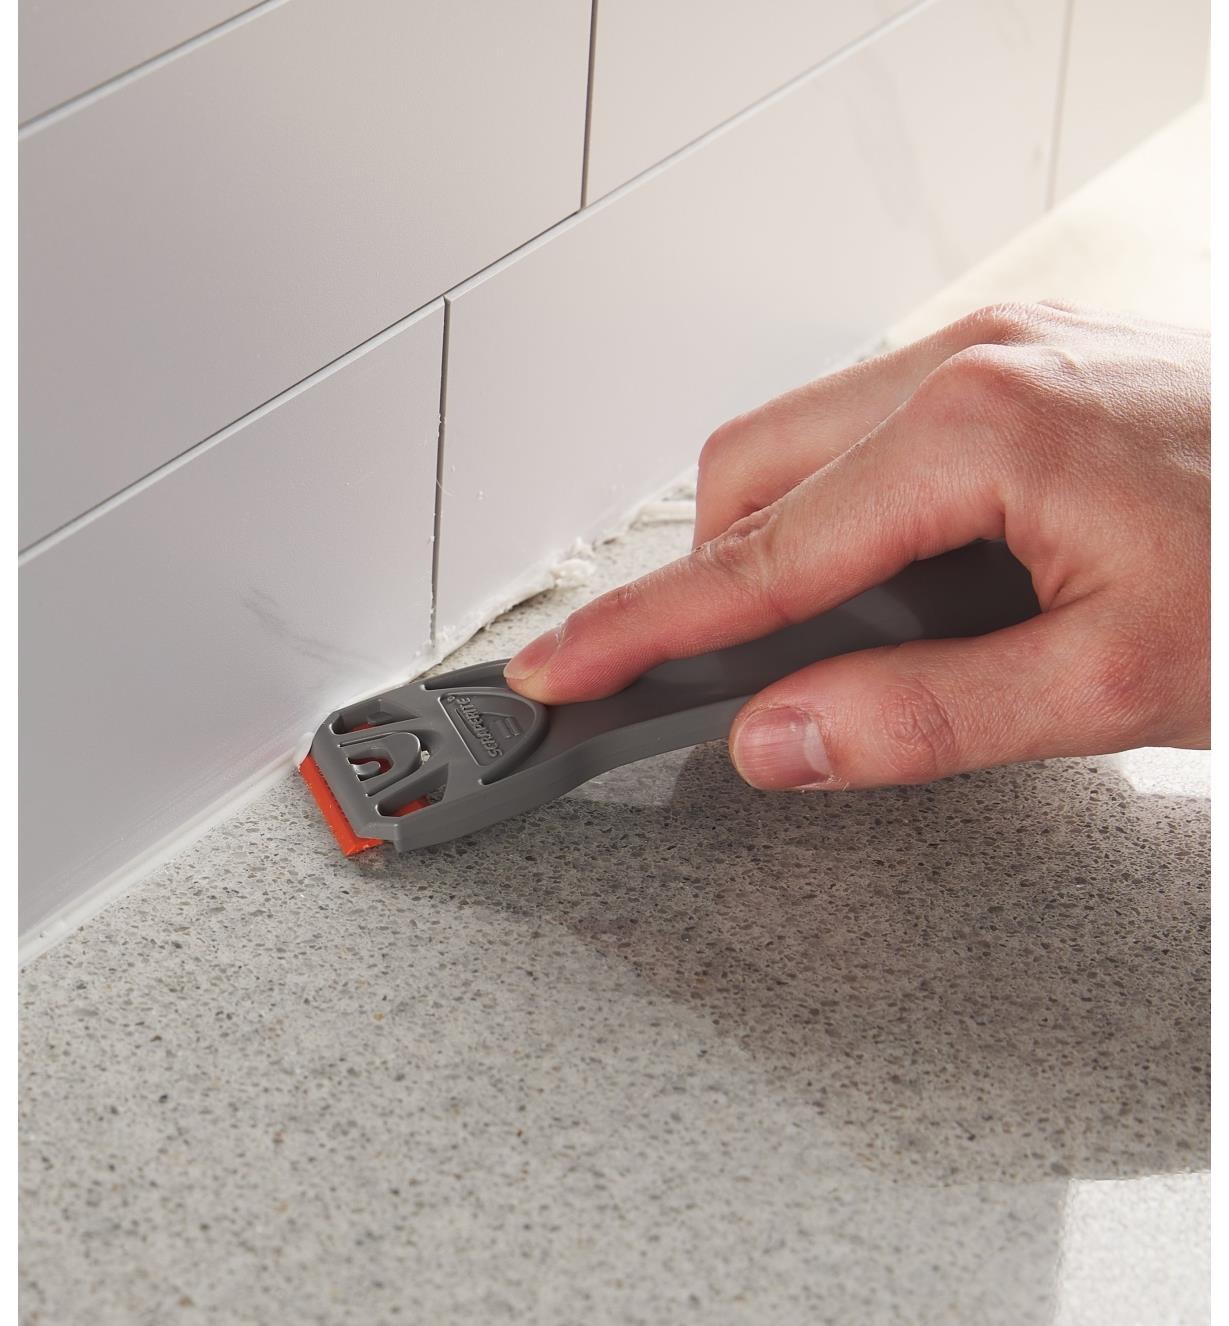 Using a plastic razor blade to remove excess caulking from a countertop